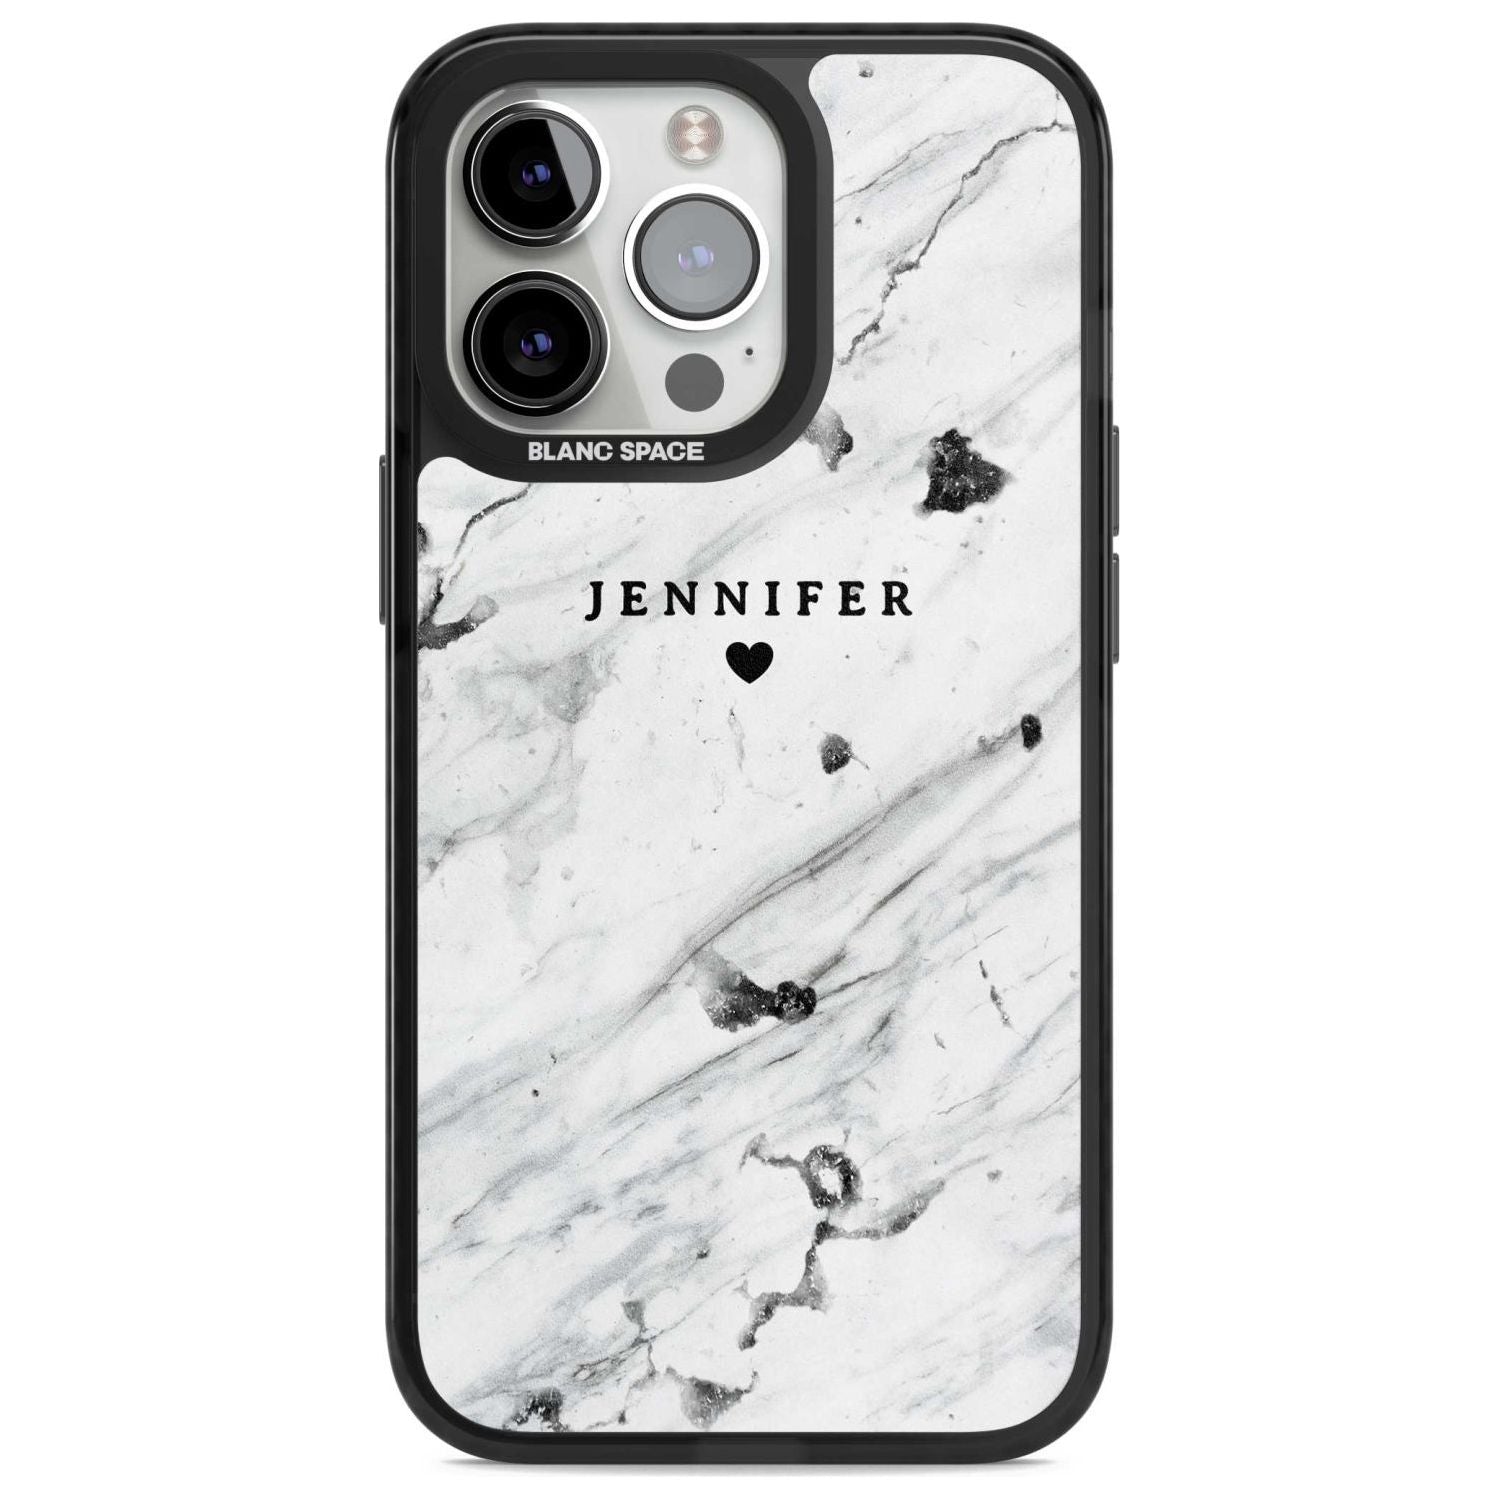 Personalised Black & White Marble Texture Custom Phone Case iPhone 15 Pro Max / Magsafe Black Impact Case,iPhone 15 Pro / Magsafe Black Impact Case,iPhone 14 Pro Max / Magsafe Black Impact Case,iPhone 14 Pro / Magsafe Black Impact Case,iPhone 13 Pro / Magsafe Black Impact Case Blanc Space